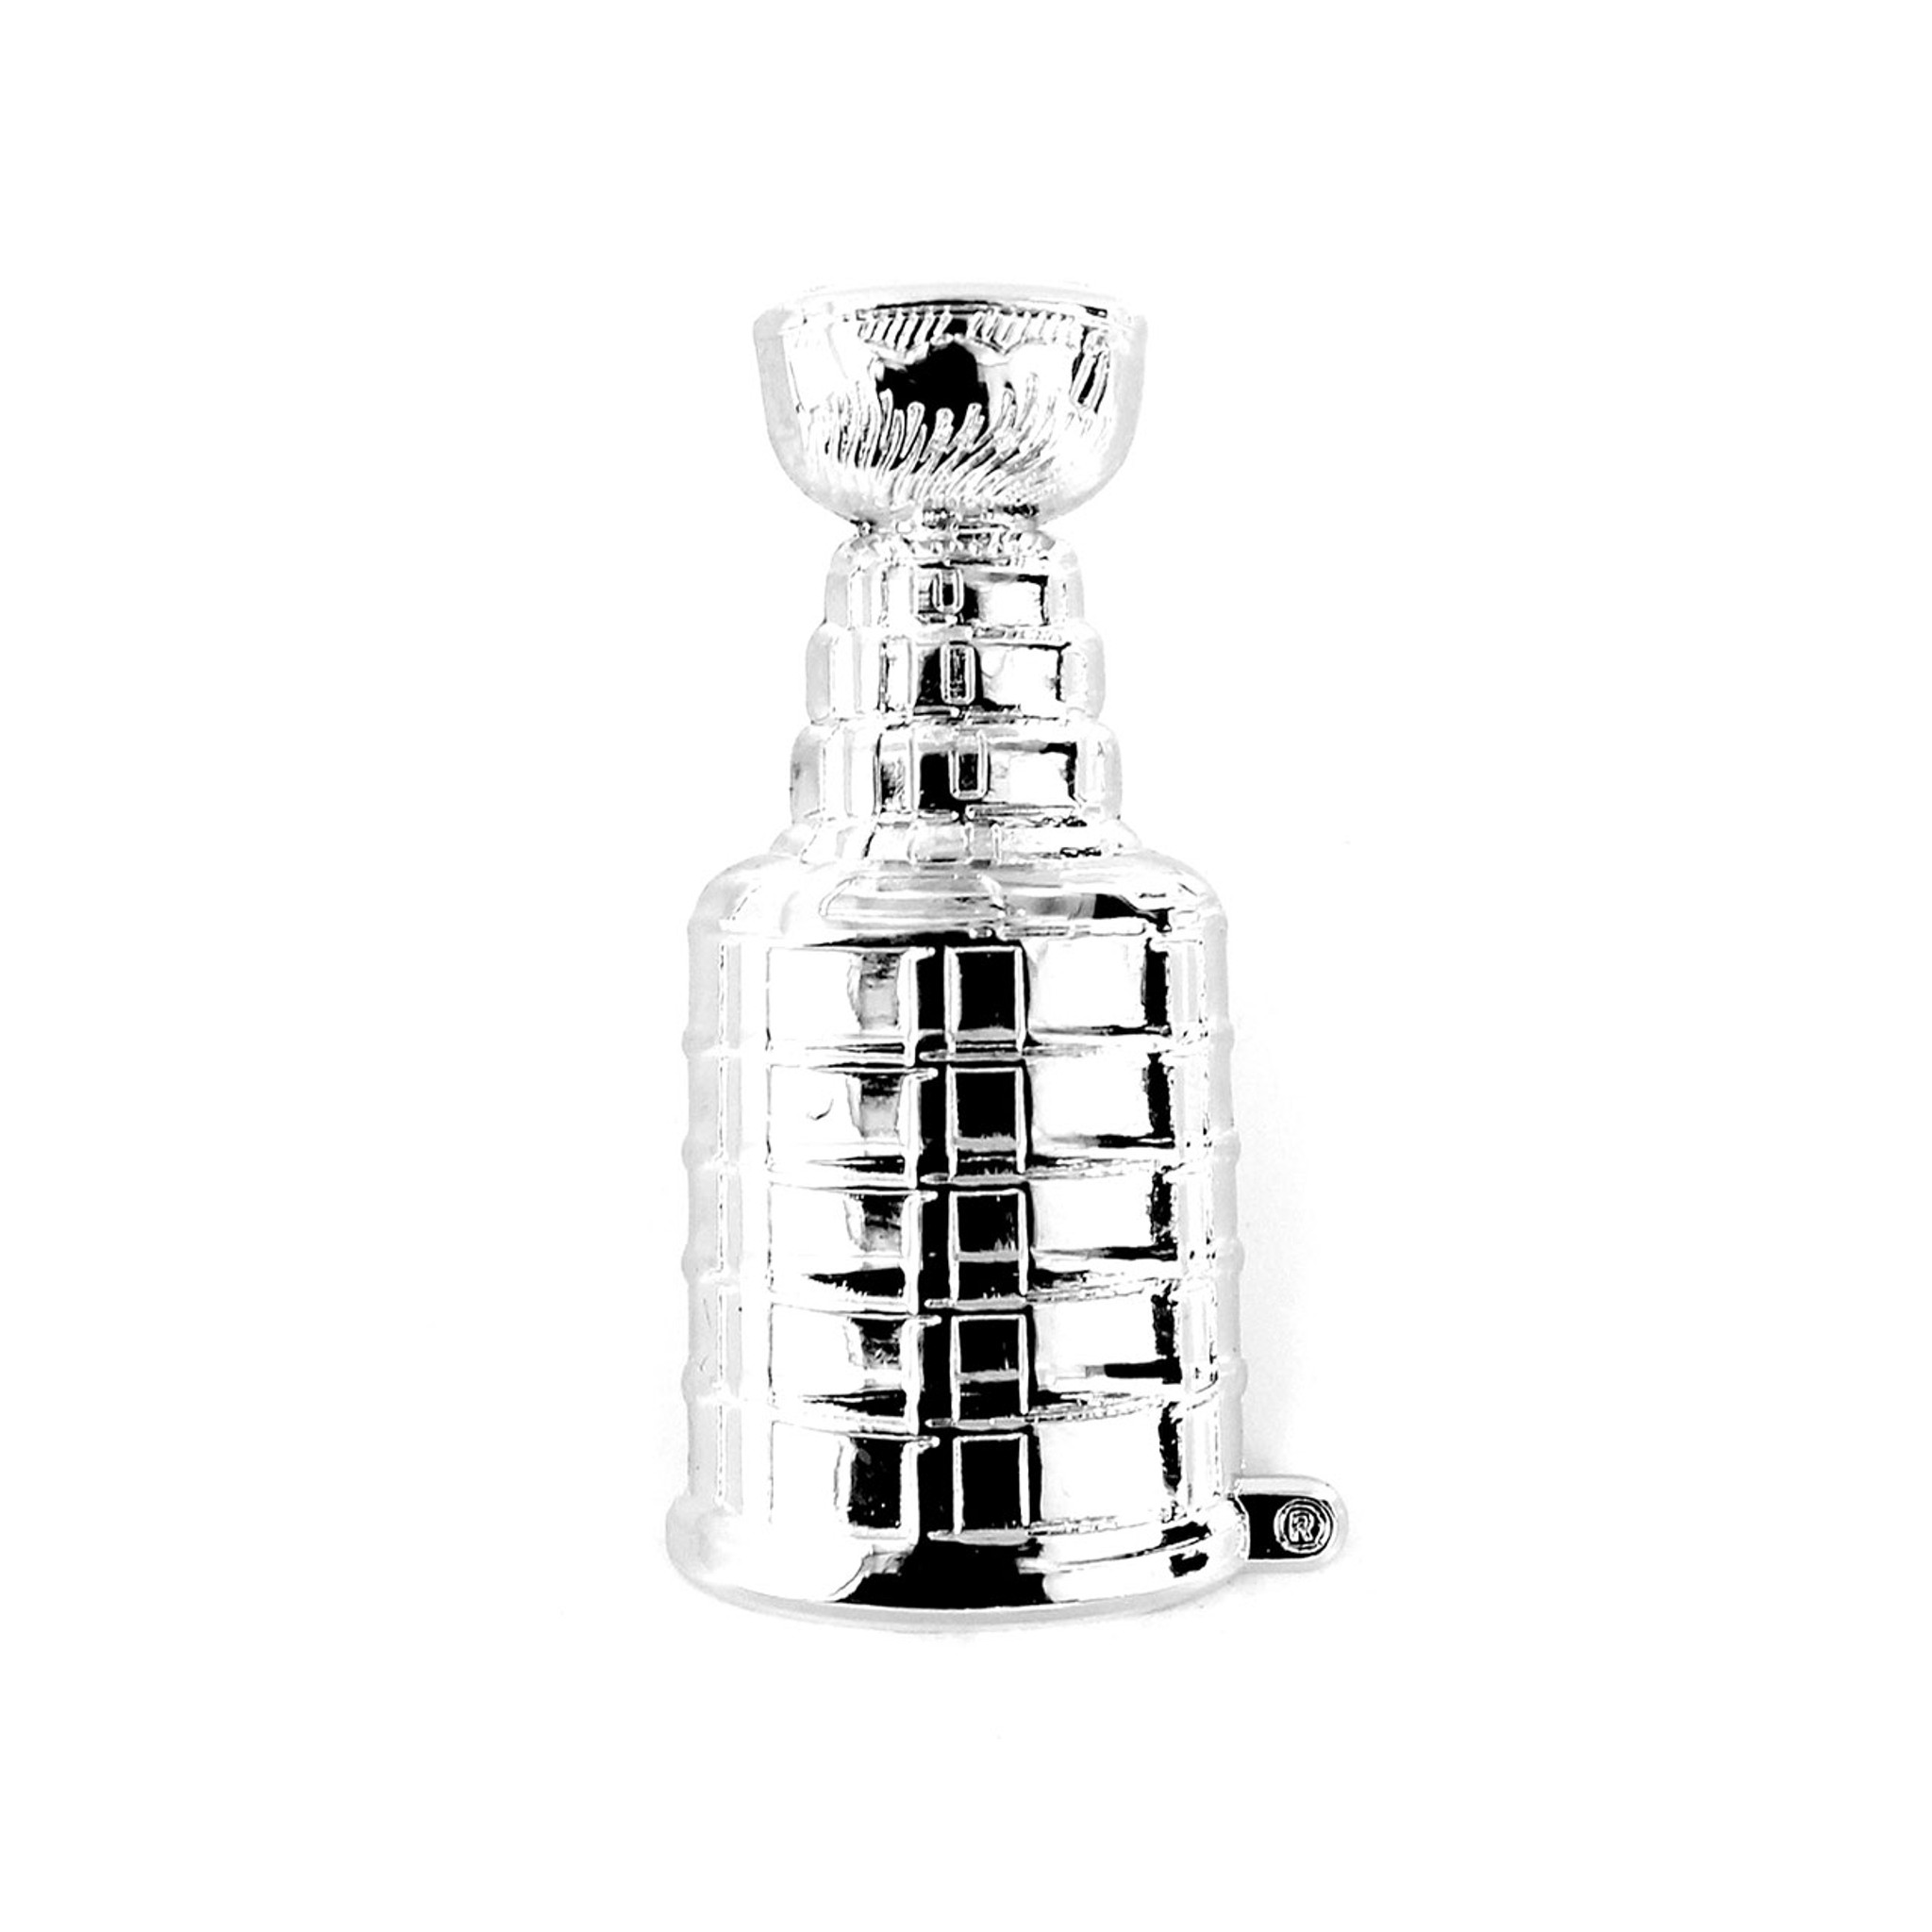 2020 NHL Stanley Cup Finals Logo Pin